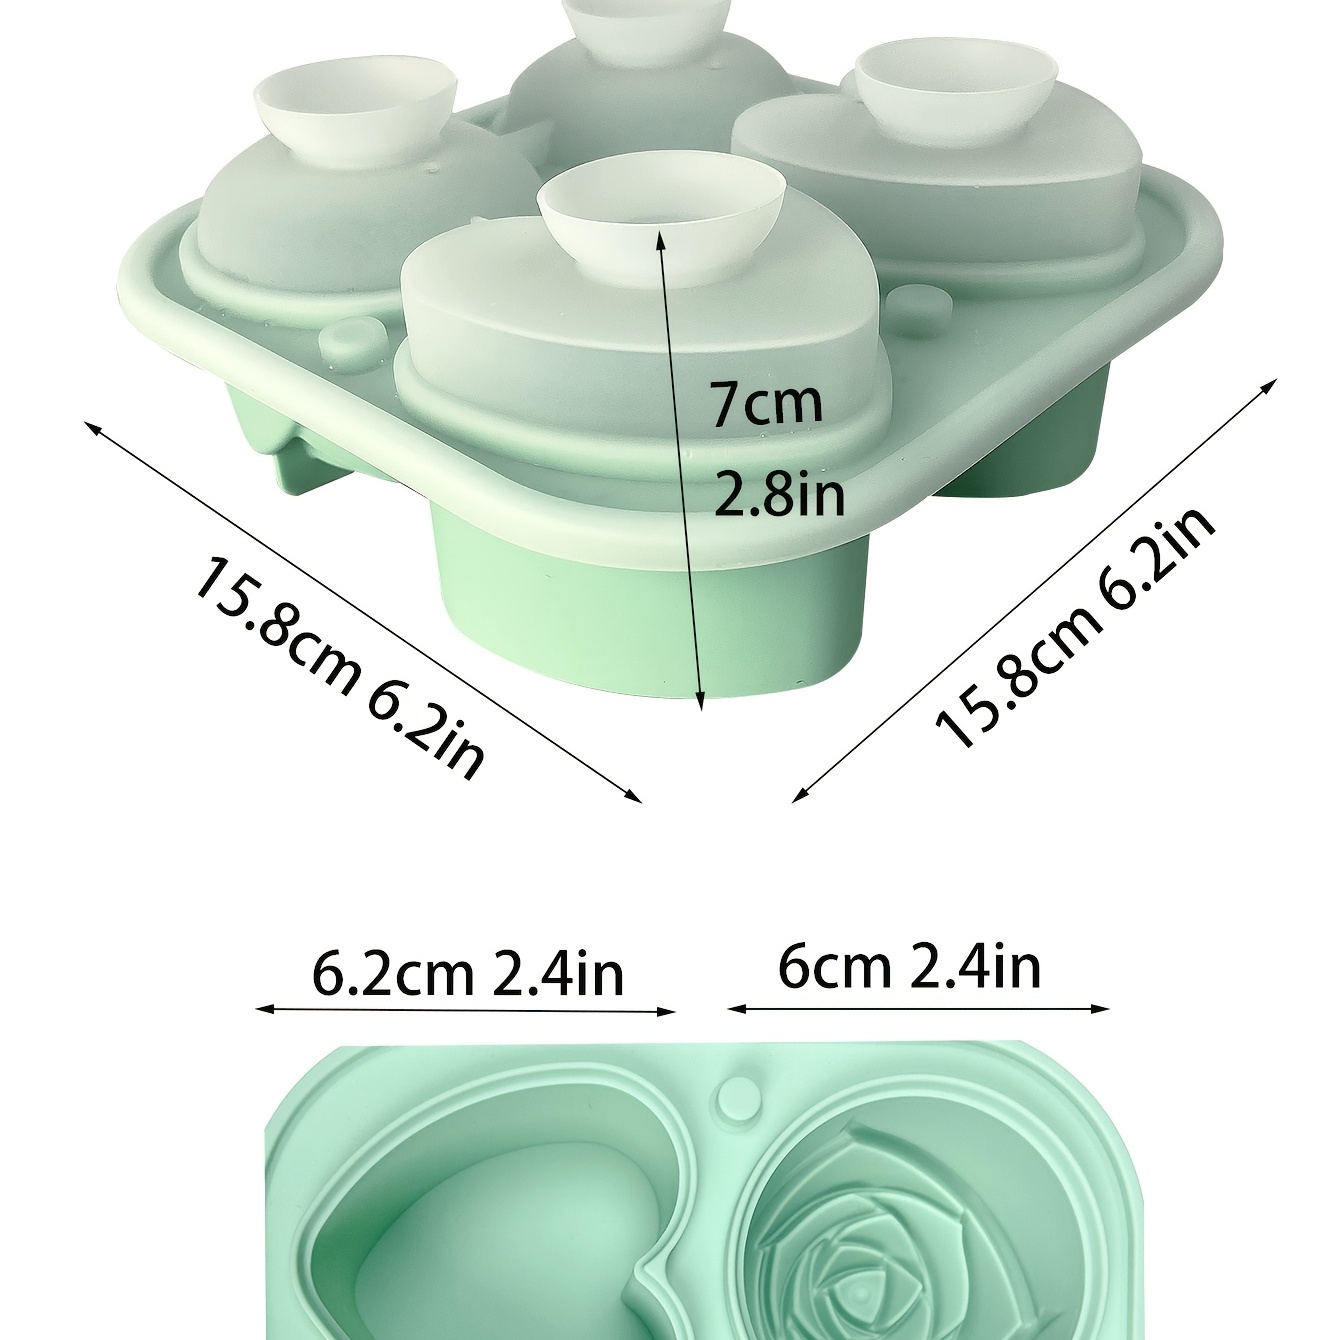 Large 3d Rose Ice Cube Mold - Silicone Rubber Fun Ice Cub For Freezer,  Cocktail Bar, Party, Kitchen, Dorm - Cute Flower Shape Ice Cube Trays For  Chilling Drinks And Cocktails - Temu